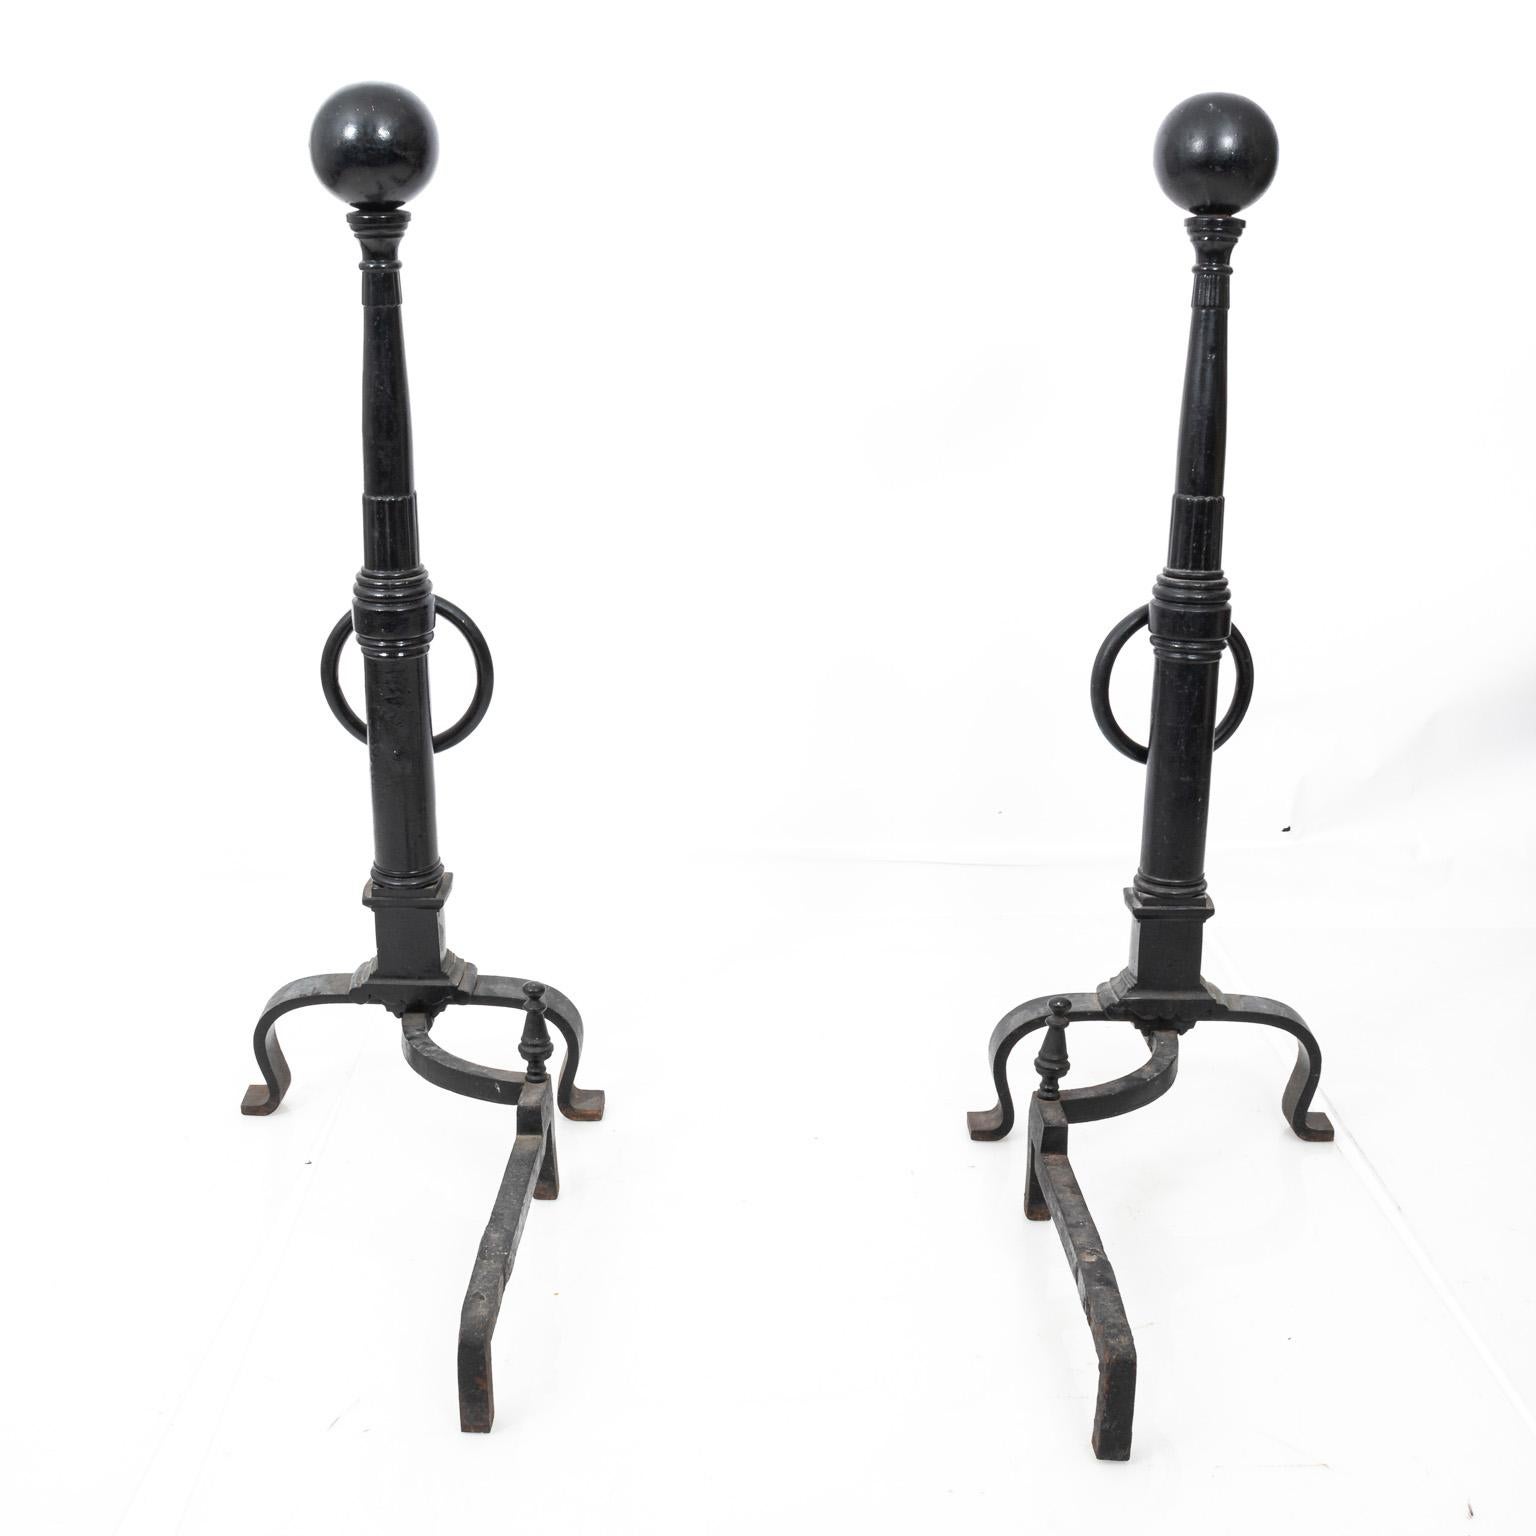 Black wrought iron ball finial andirons. Please note of wear consistent with age and daily use.
  